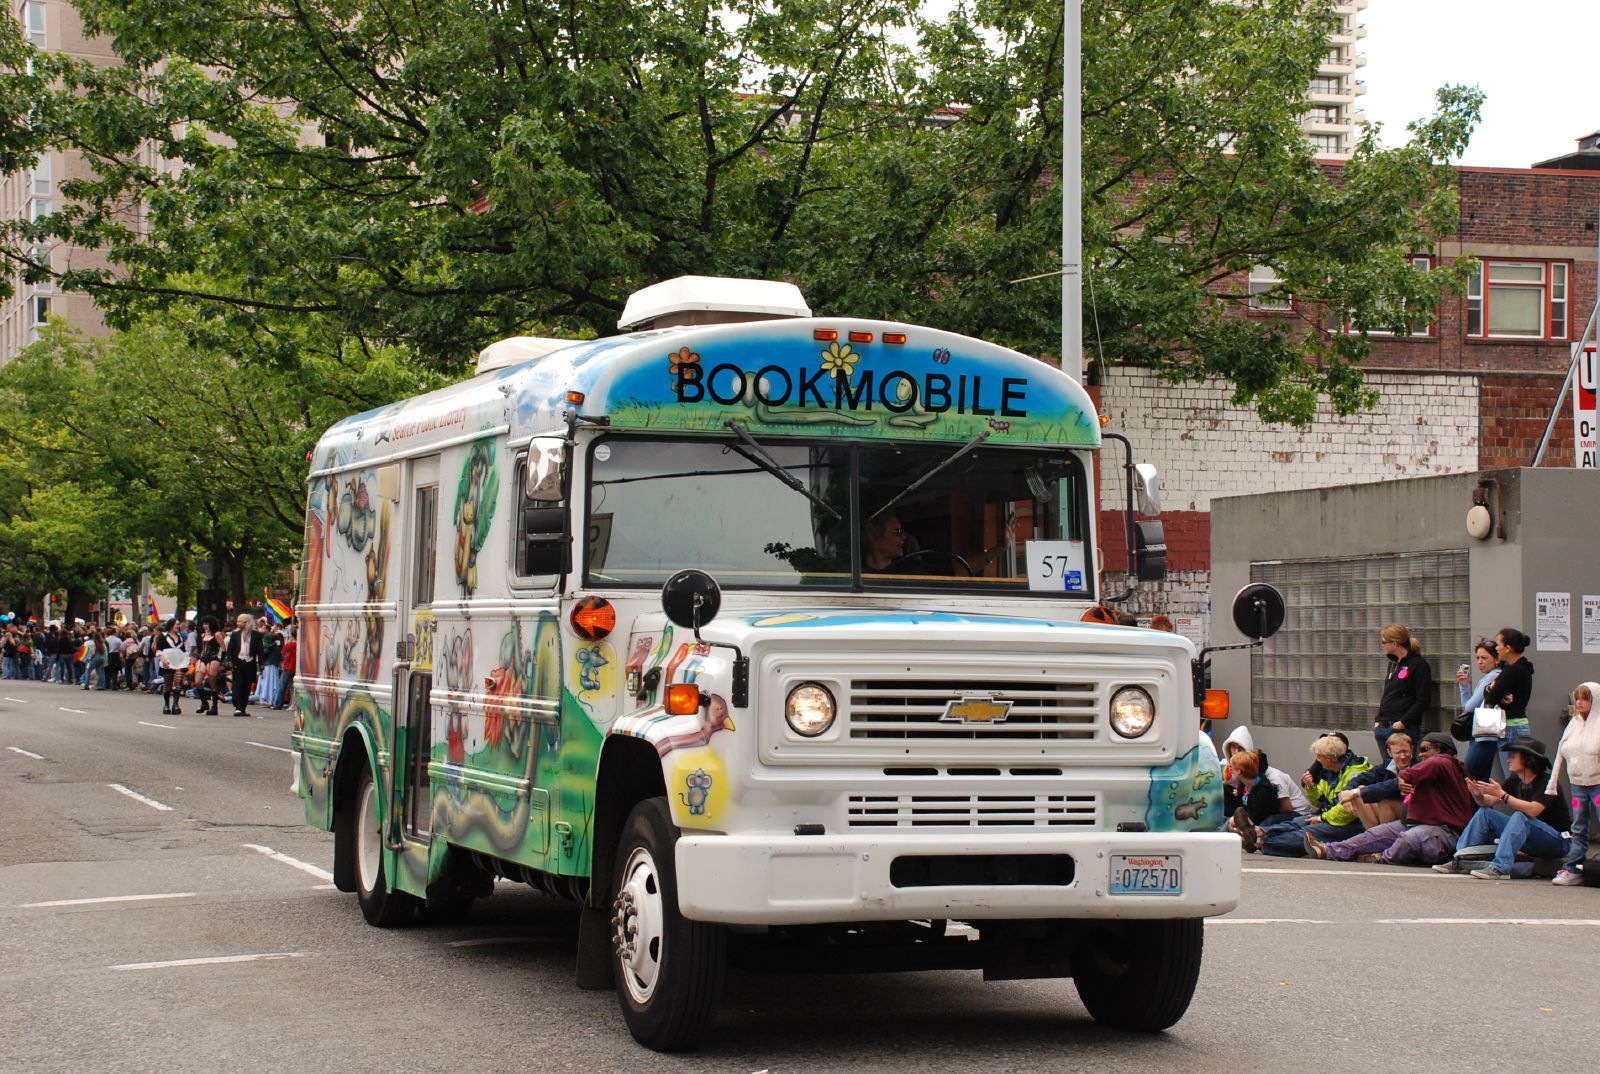 Bookmobiles – Education on the Move